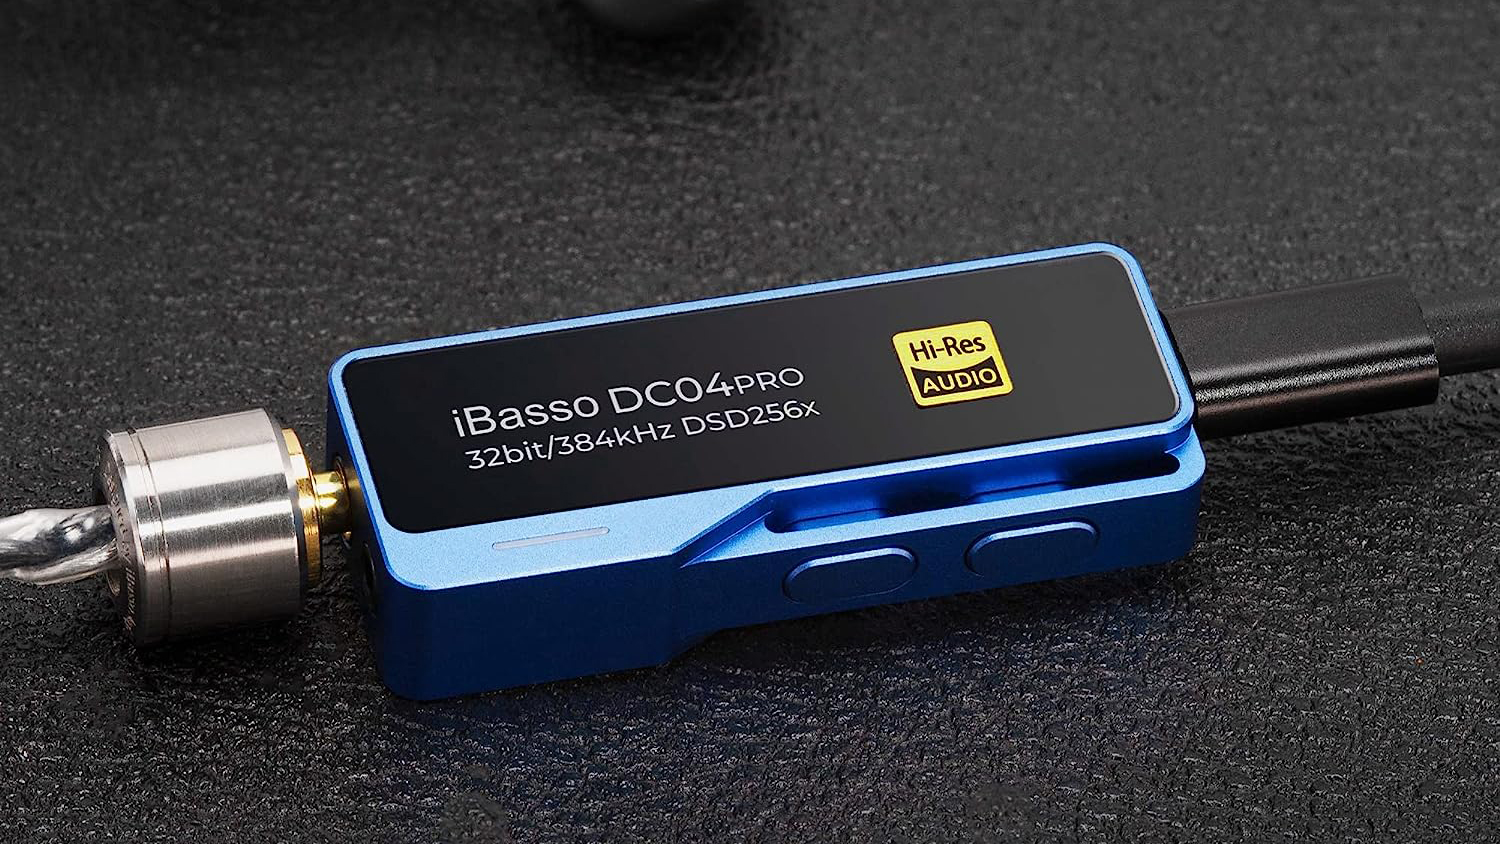 A manufacturer photo of the iBasso DC04Pro sitting atop a black surface, with USB cable and 3.5mm cables inserted.